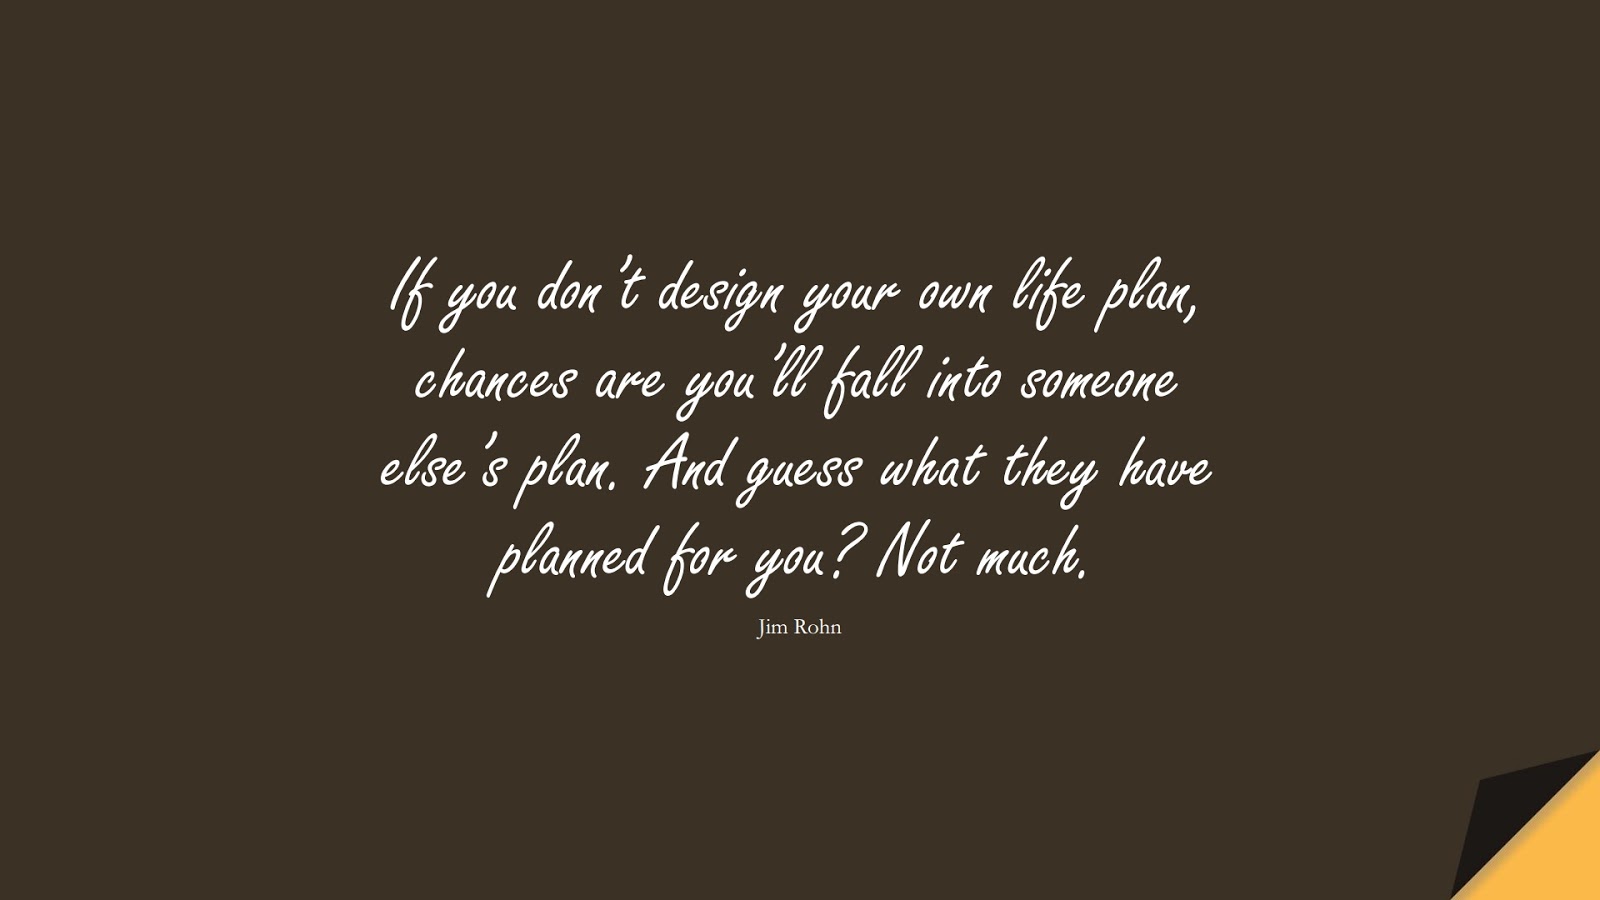 If you don’t design your own life plan, chances are you’ll fall into someone else’s plan. And guess what they have planned for you? Not much. (Jim Rohn);  #InspirationalQuotes